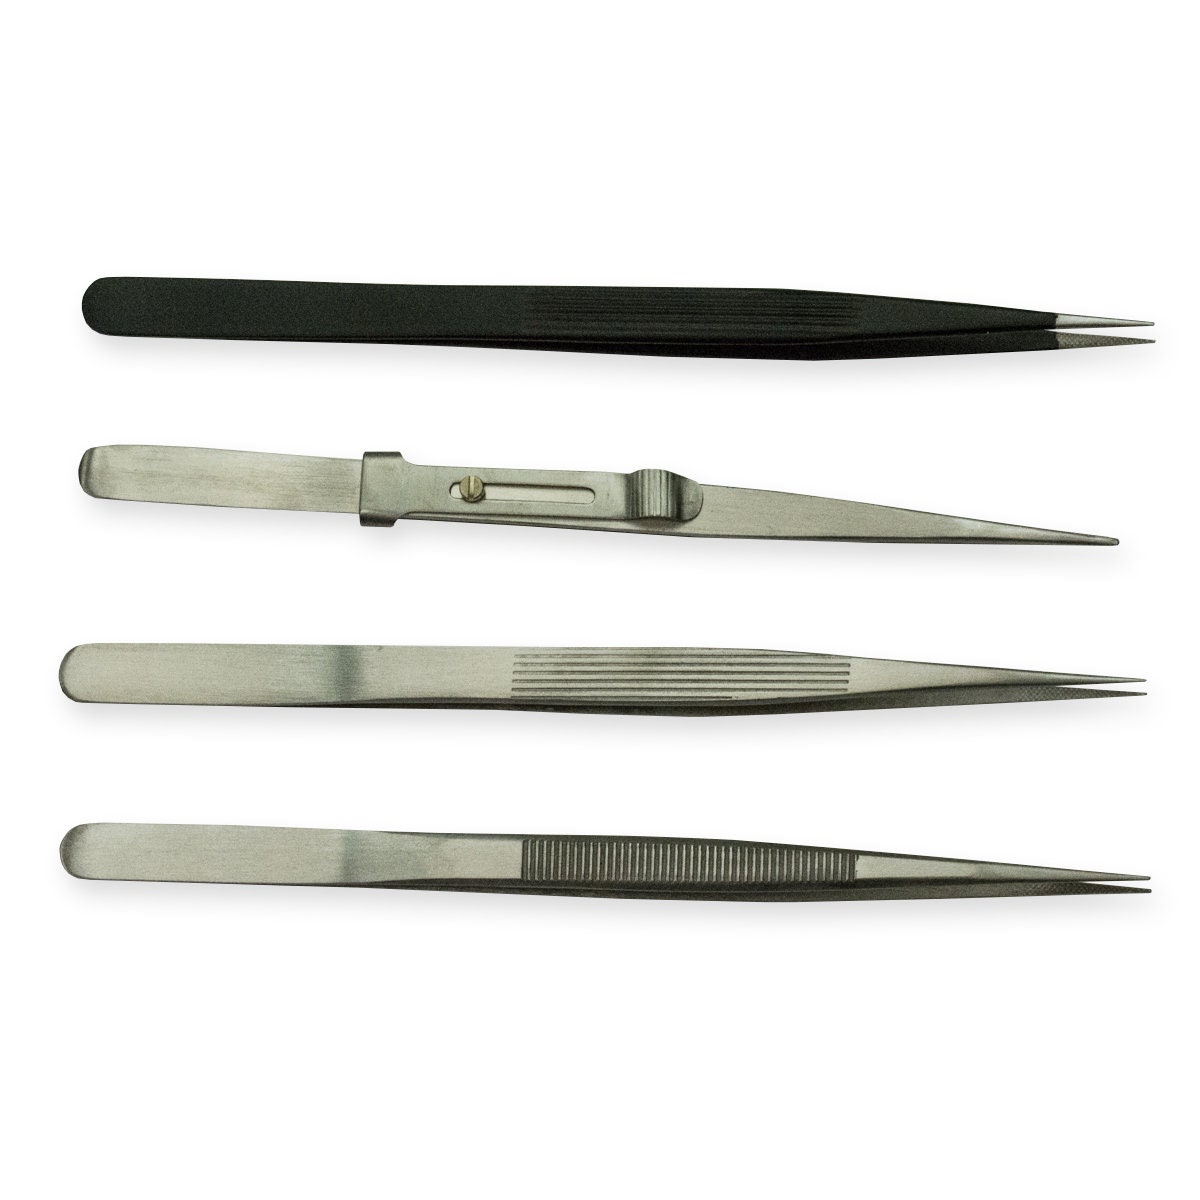 Stainless Steel Beading Tweezers, Stainless Steel Pointed Tweezers,  Jewellery Tweezers, Crafting Tweezers 1xpcs 